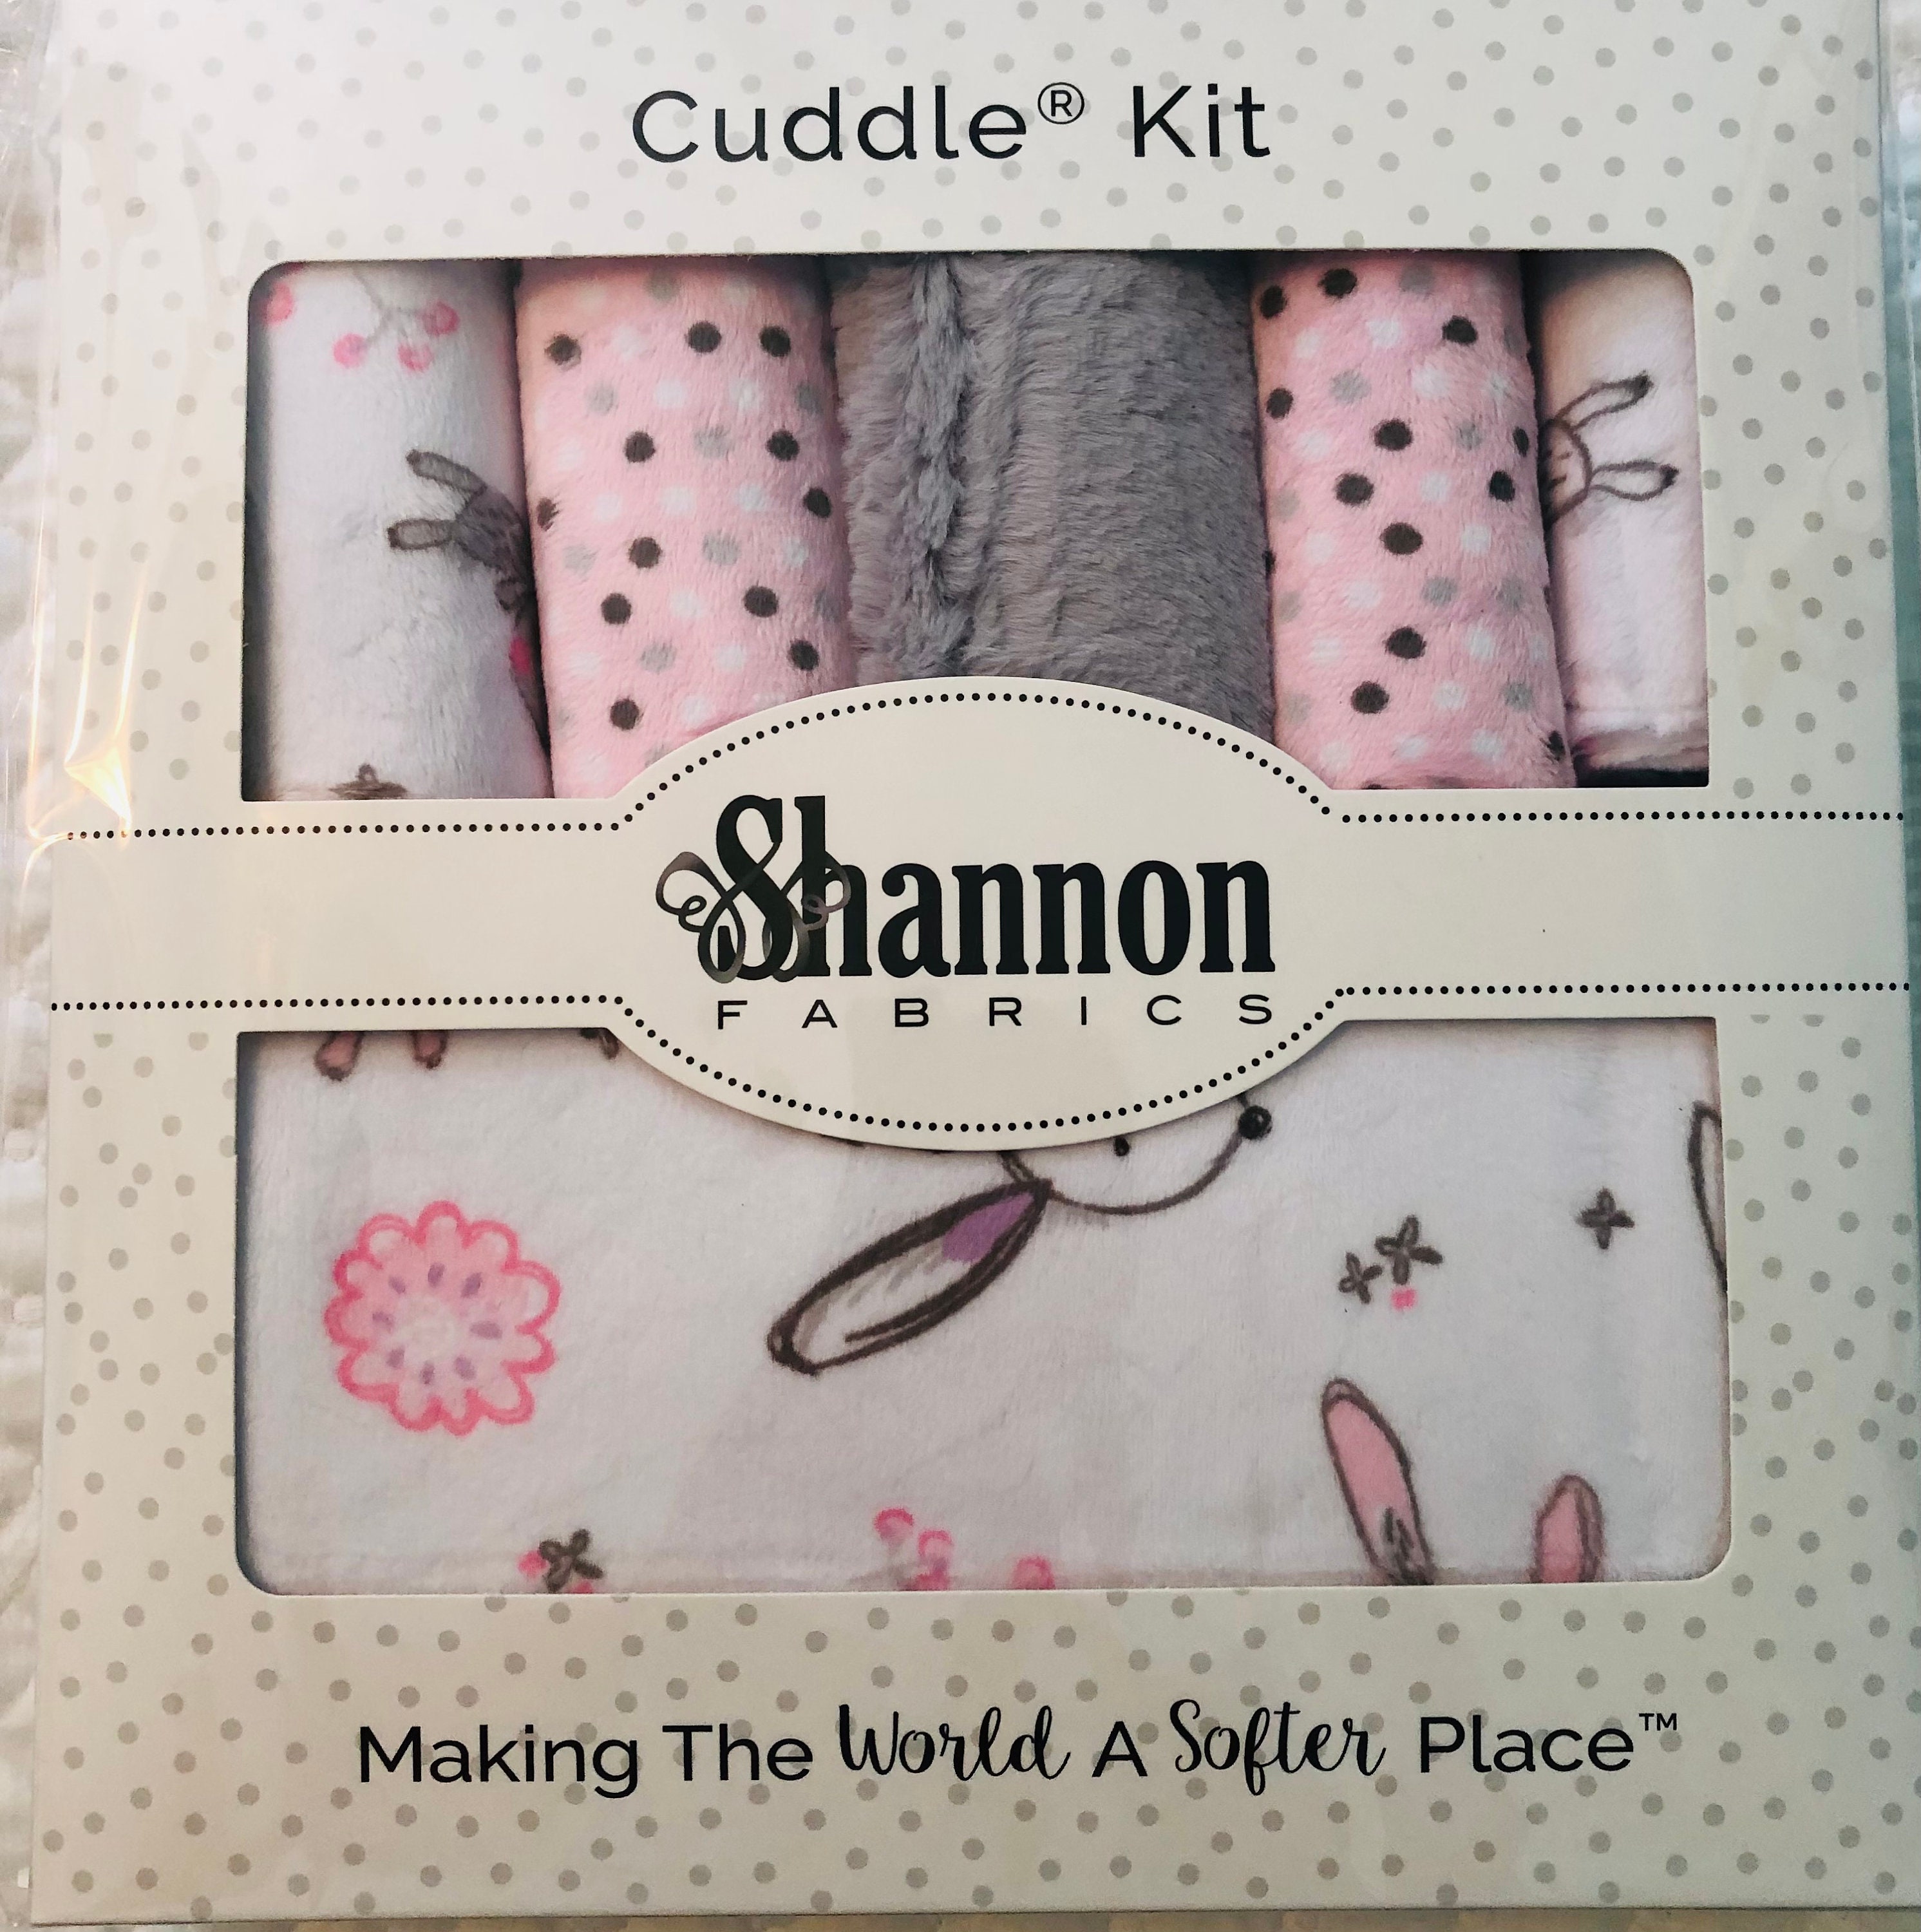 Shannon Fabrics Cuddle Kit - Bambino Hay, There in Green | Minky/Cuddle | Novelty